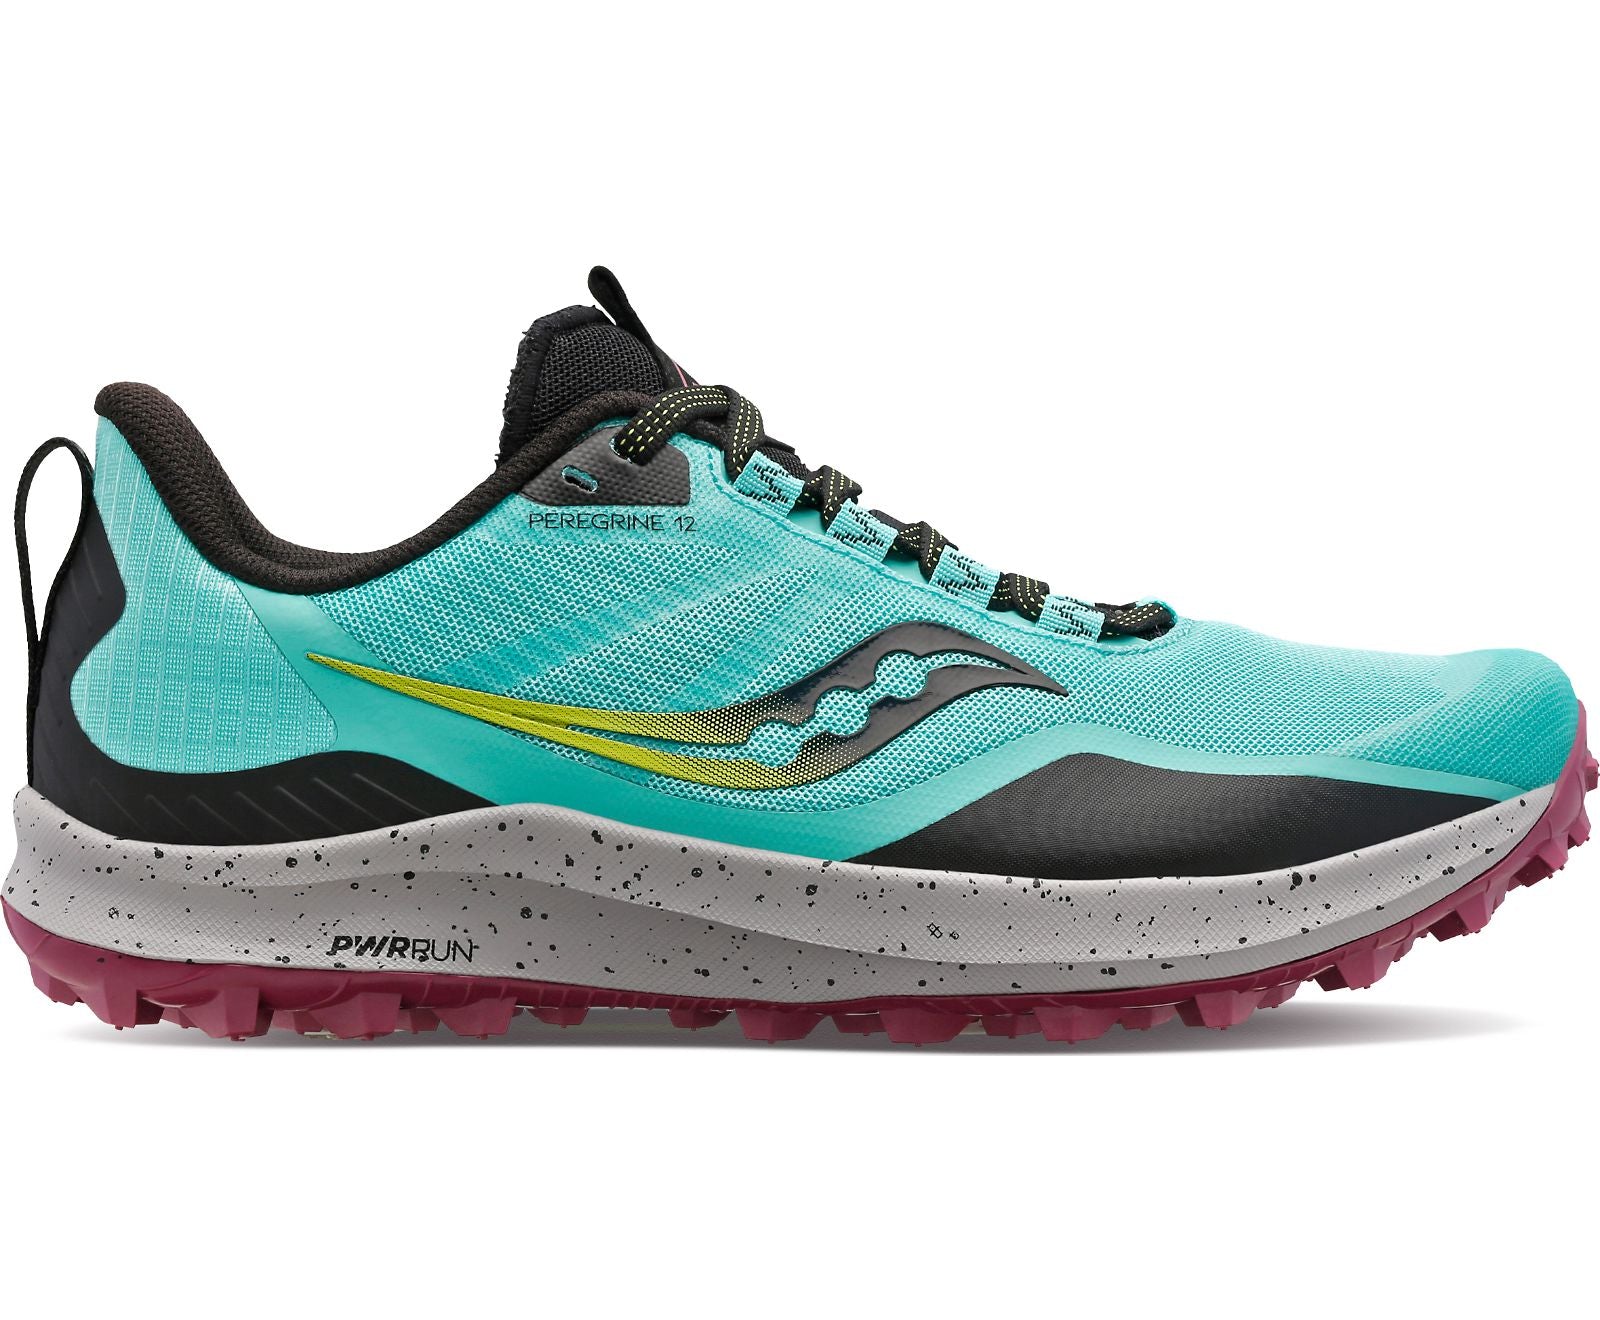 Named for the fastest bird on earth, the Women's Peregrine 12 from Saucony more than lives up to its name. Stripped down for blistering speeds, it’s time to get comfortable free-flying across the trails.